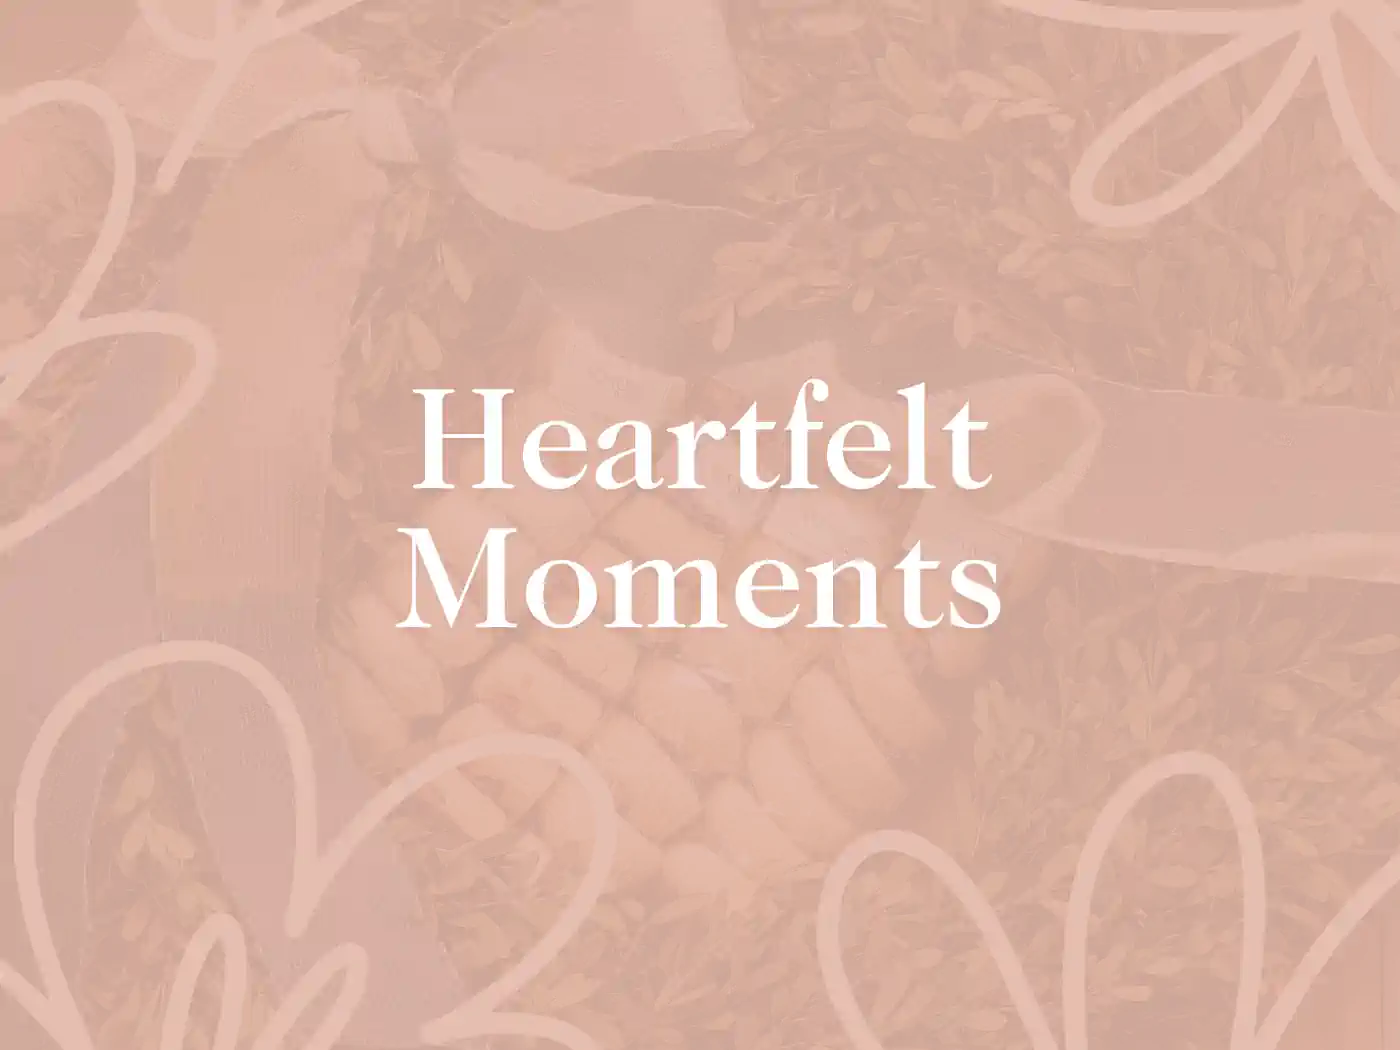 Heartfelt Moments banner with soft floral background - Fabulous Flowers and Gifts, Heartfelt Moments Collection.